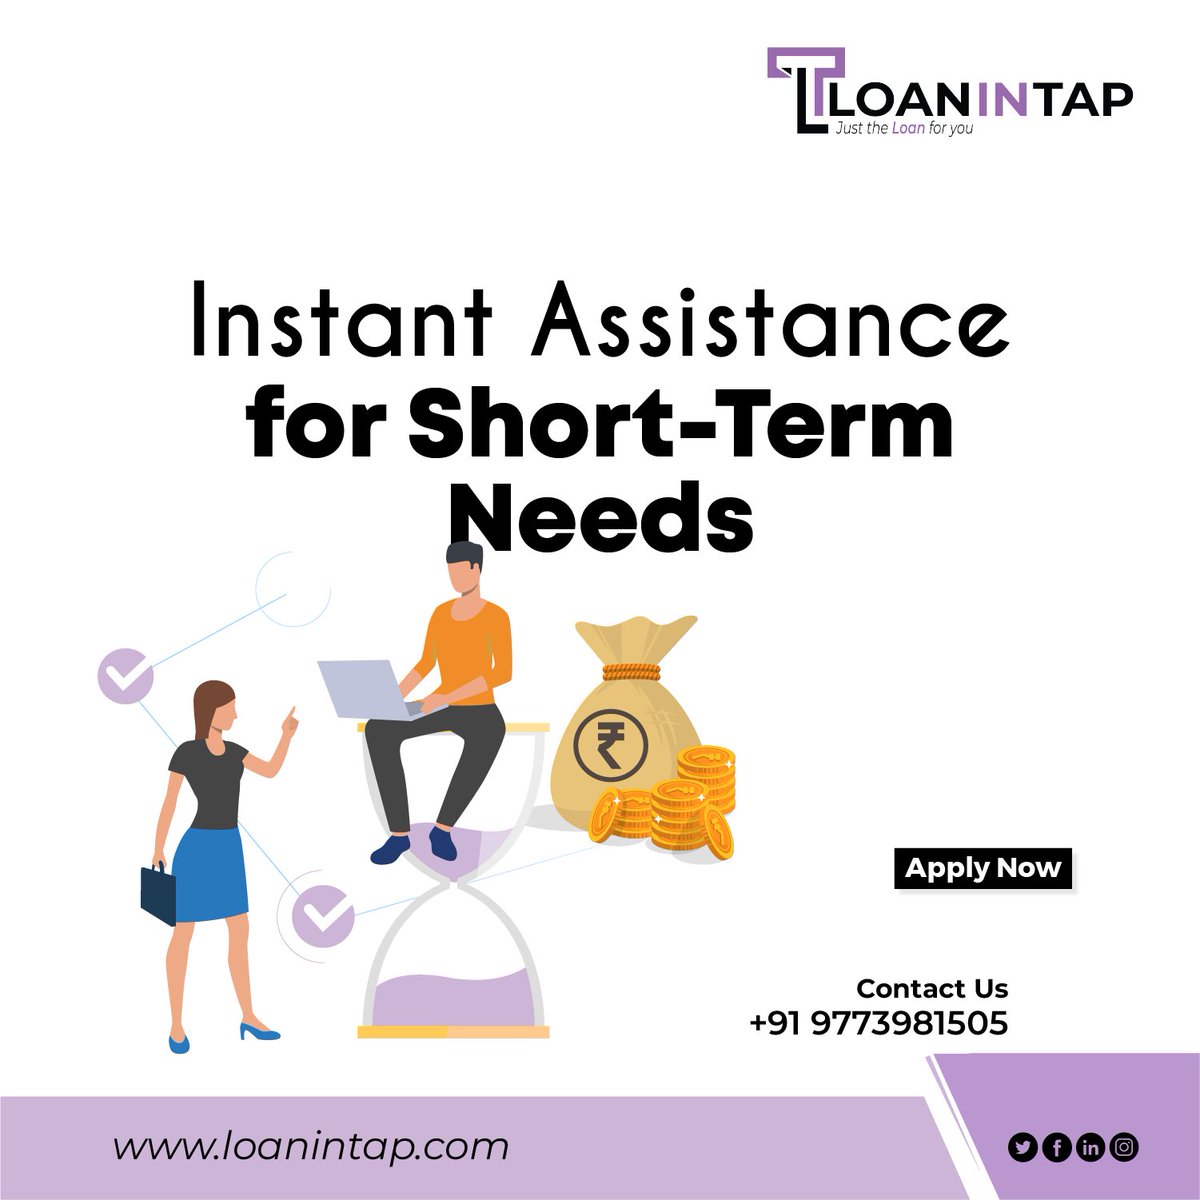 WConnect today and begin a smooth borrowing journey with Loan in Tap

#shorttermloans #instantloan #loan #loanprovider #loanservices #emiloan #business #money #finance #shorttermbusiness #buinessloan #instantbusinesloan #onlineloan #onlinebusinessloan #loanservice